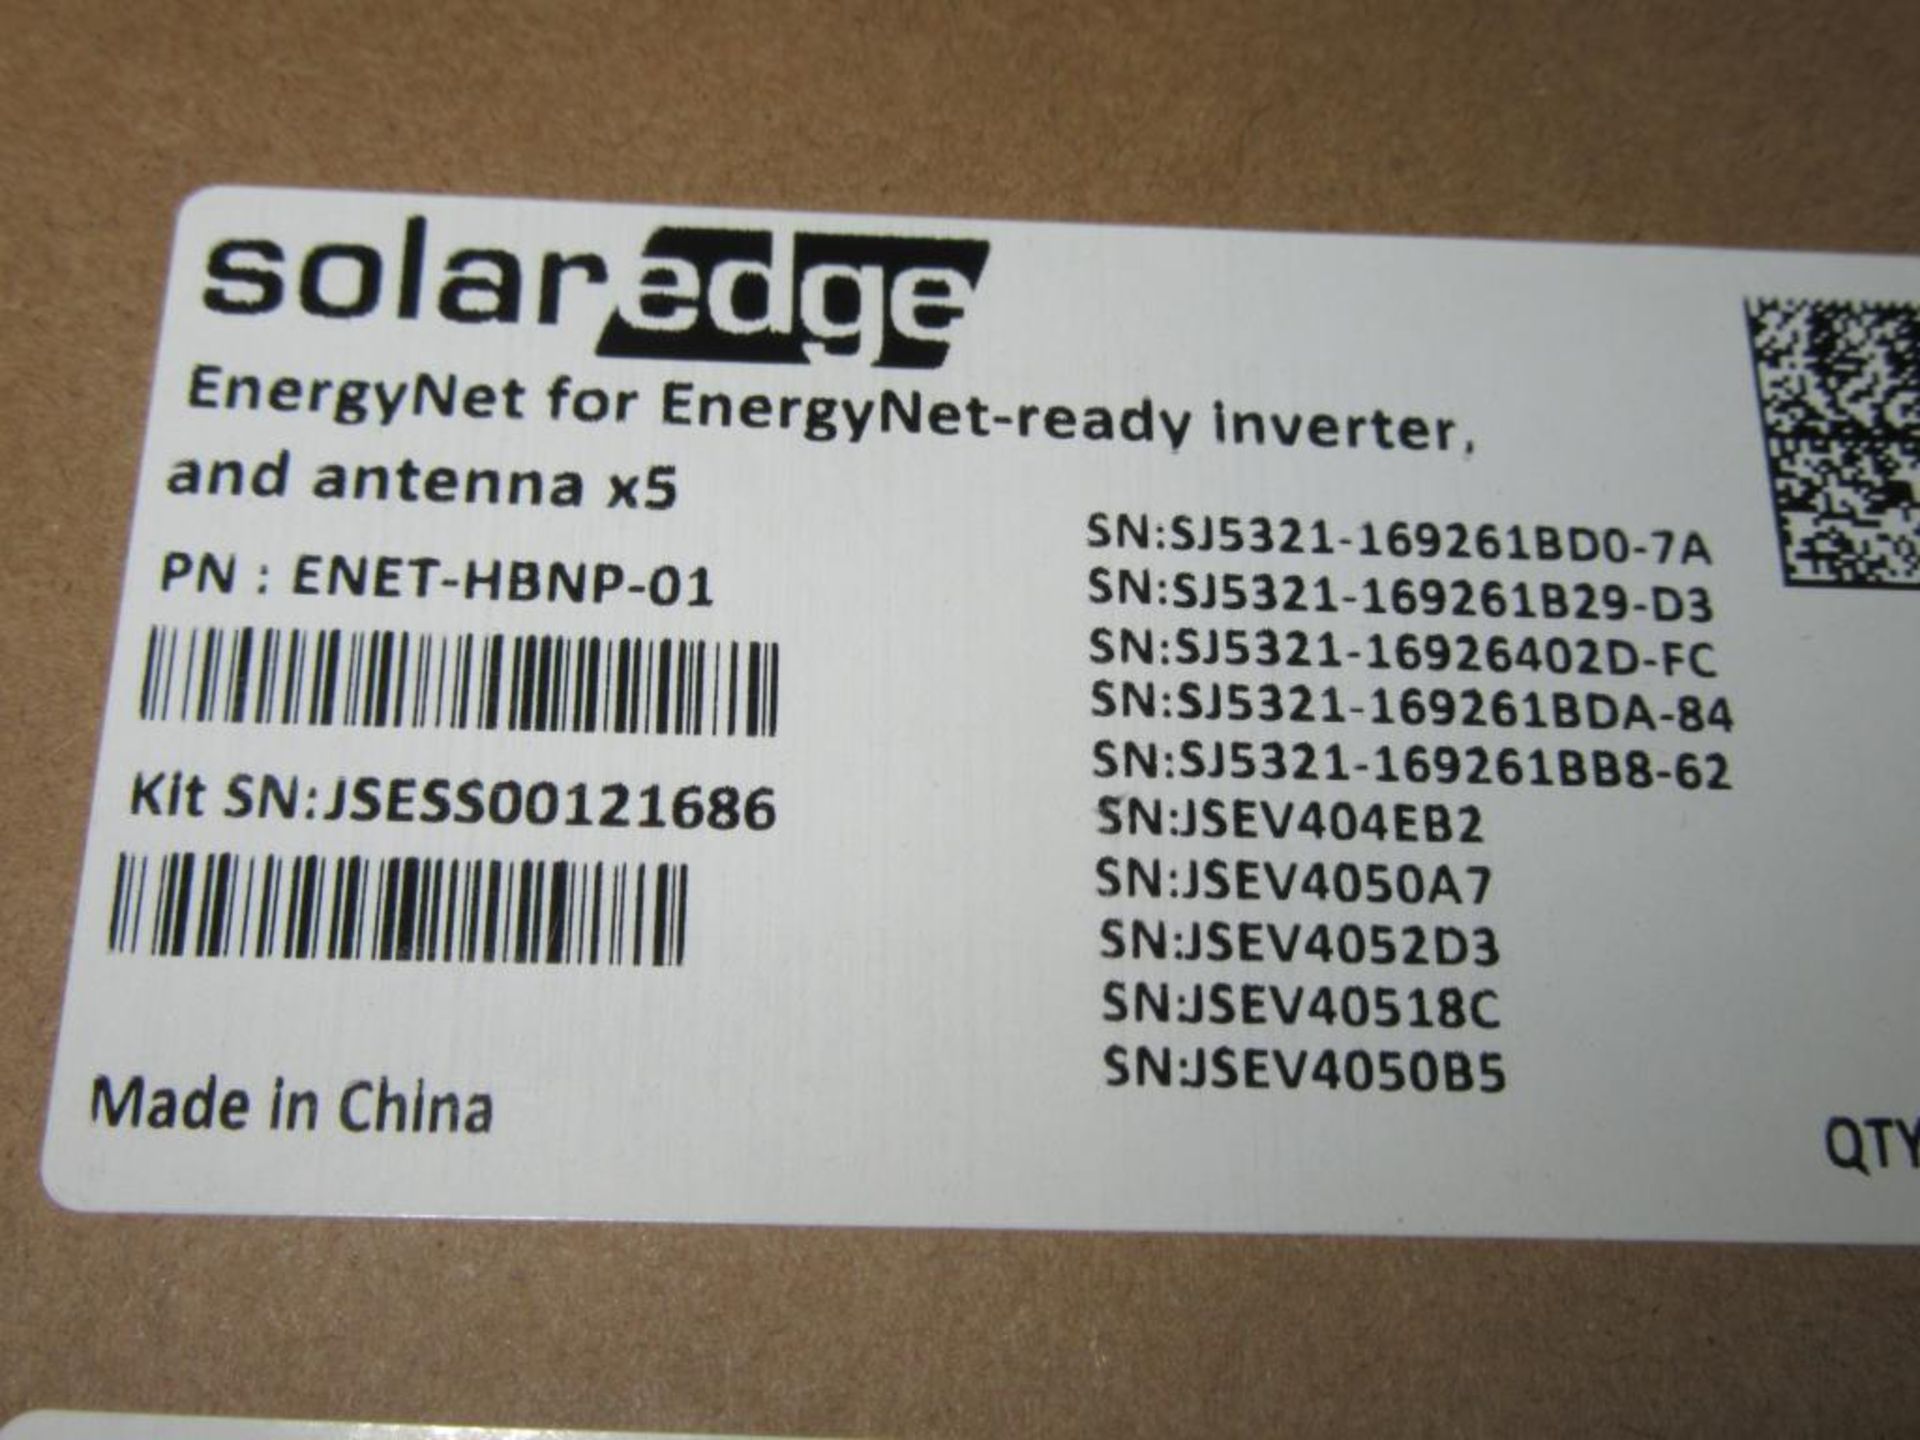 Solar Edge Home Network Plug-In Kits - Image 3 of 4